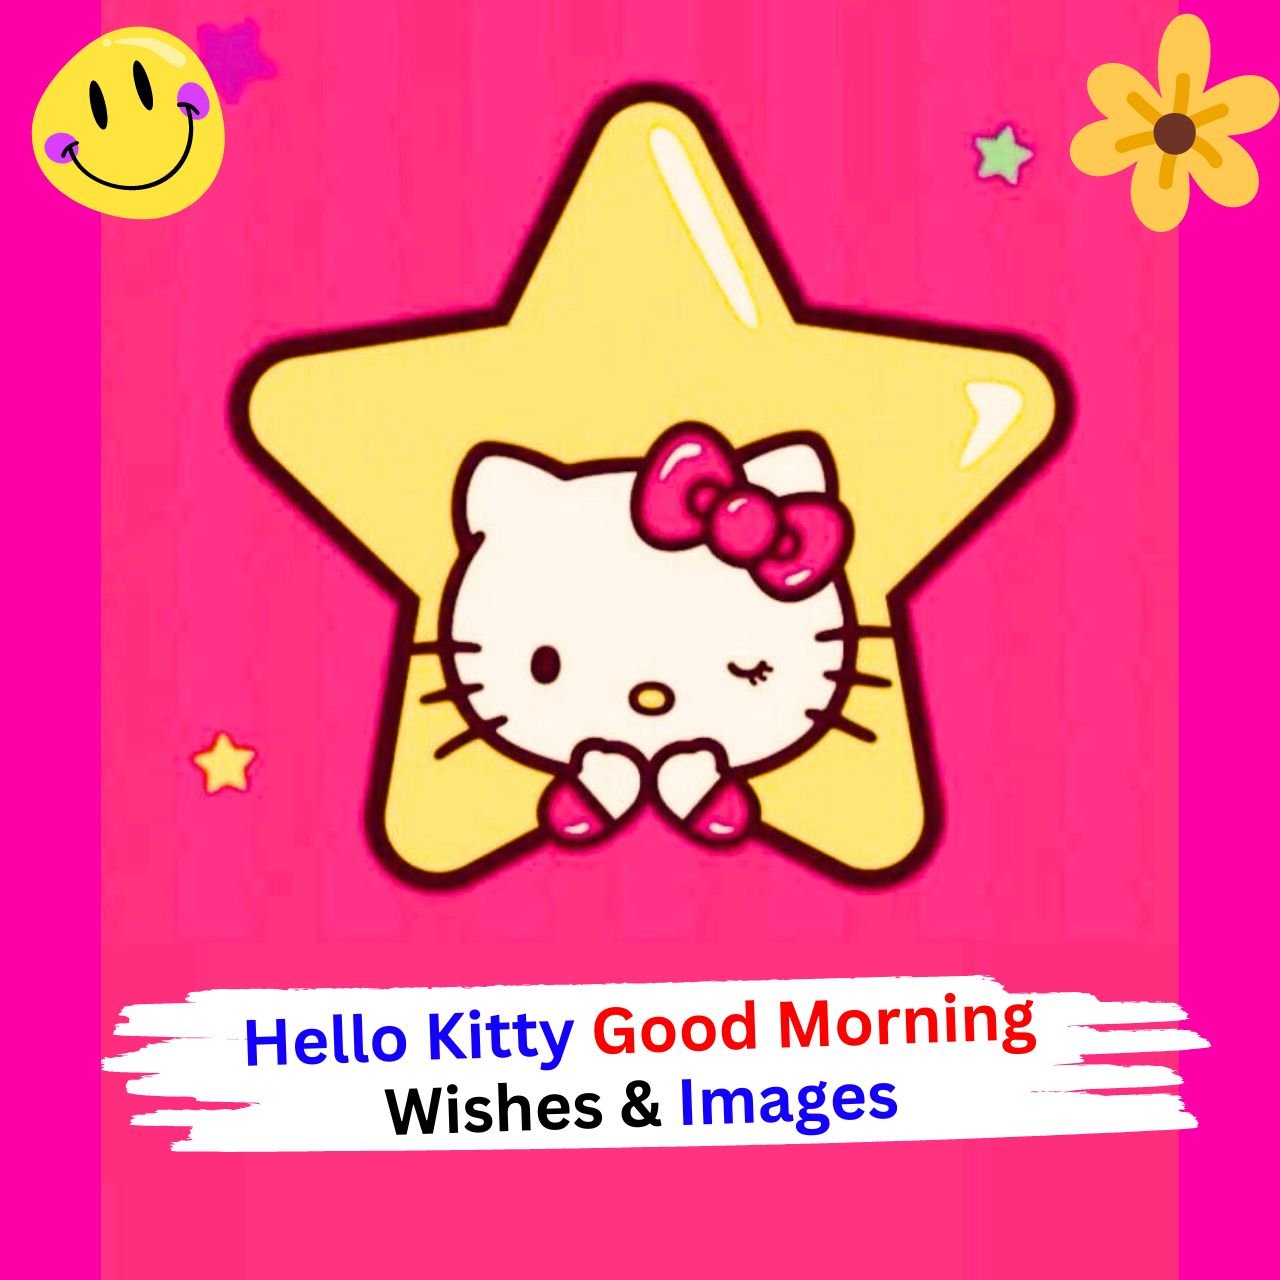 [100+] Hello Kitty Good Morning Images, GIFs, Pictures, Photos, Wishes 2024